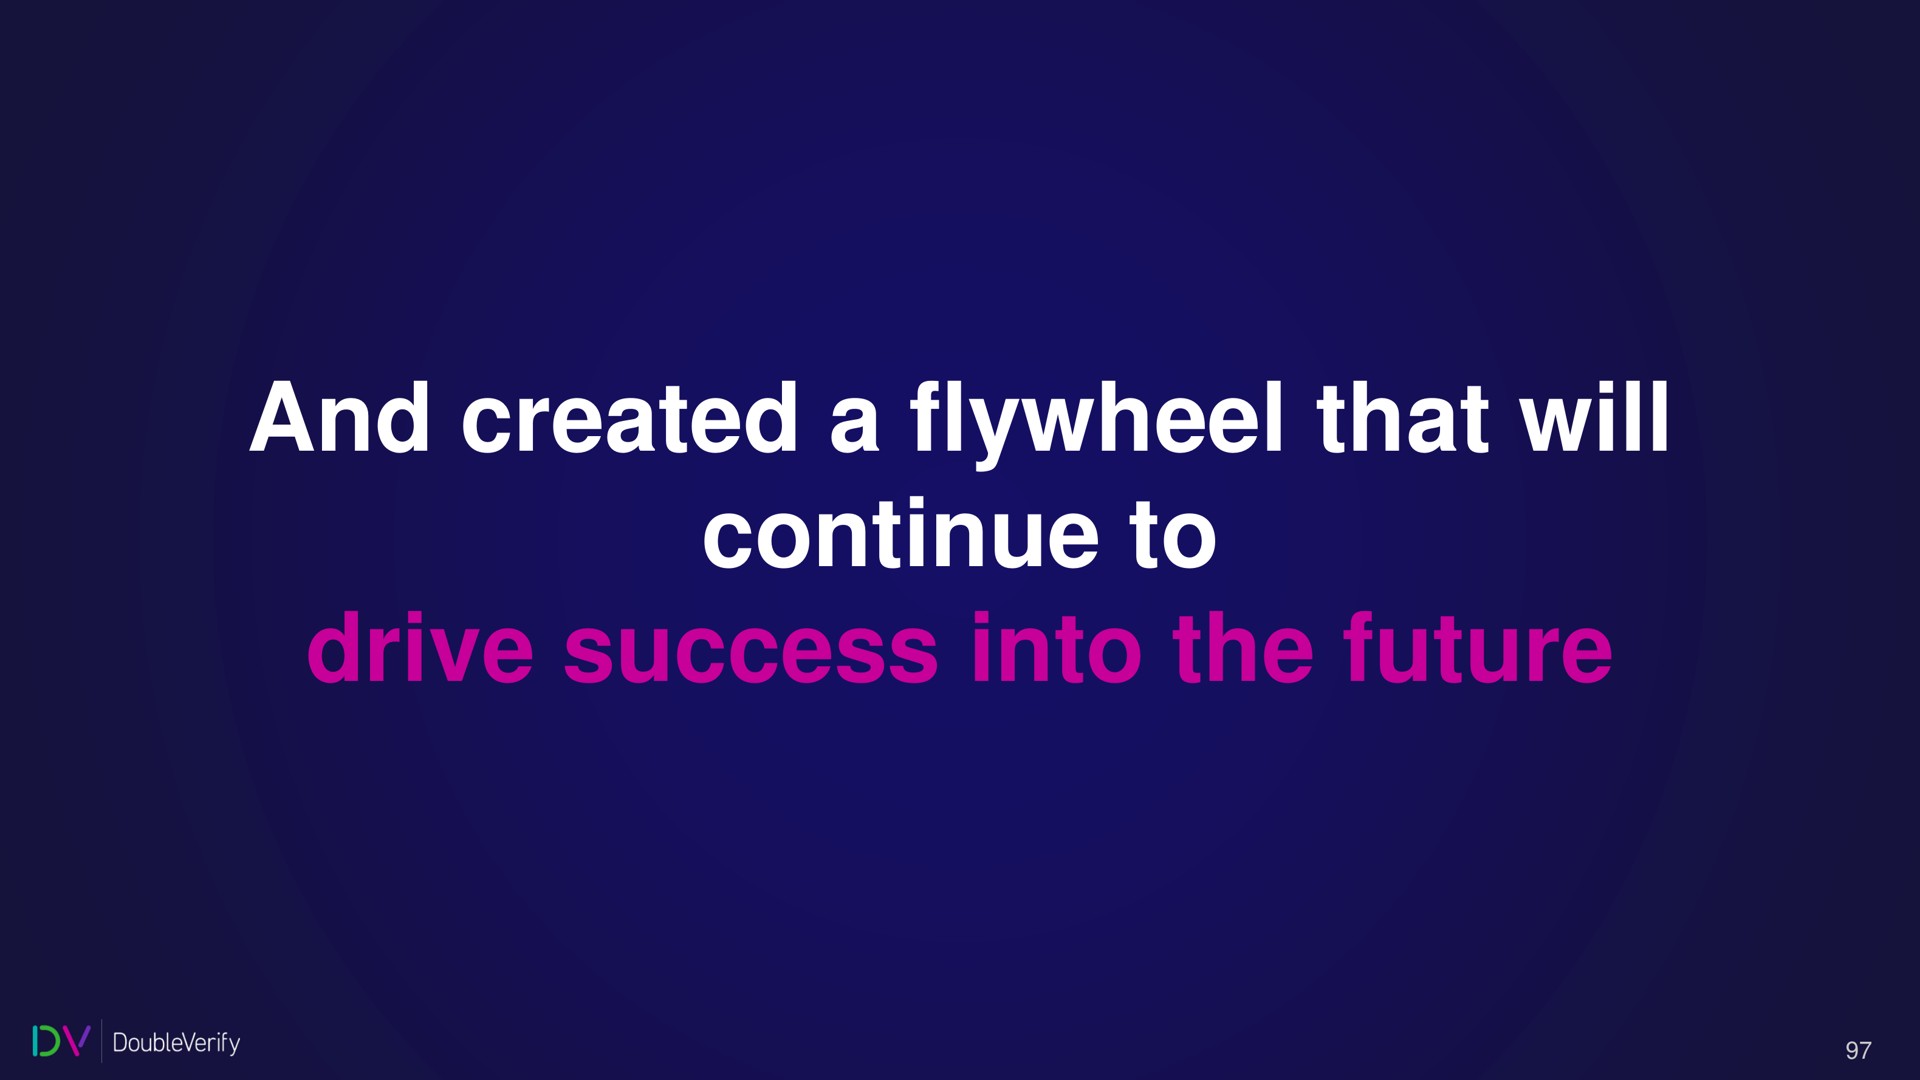 and created a flywheel that will continue to drive success into the future | DoubleVerify